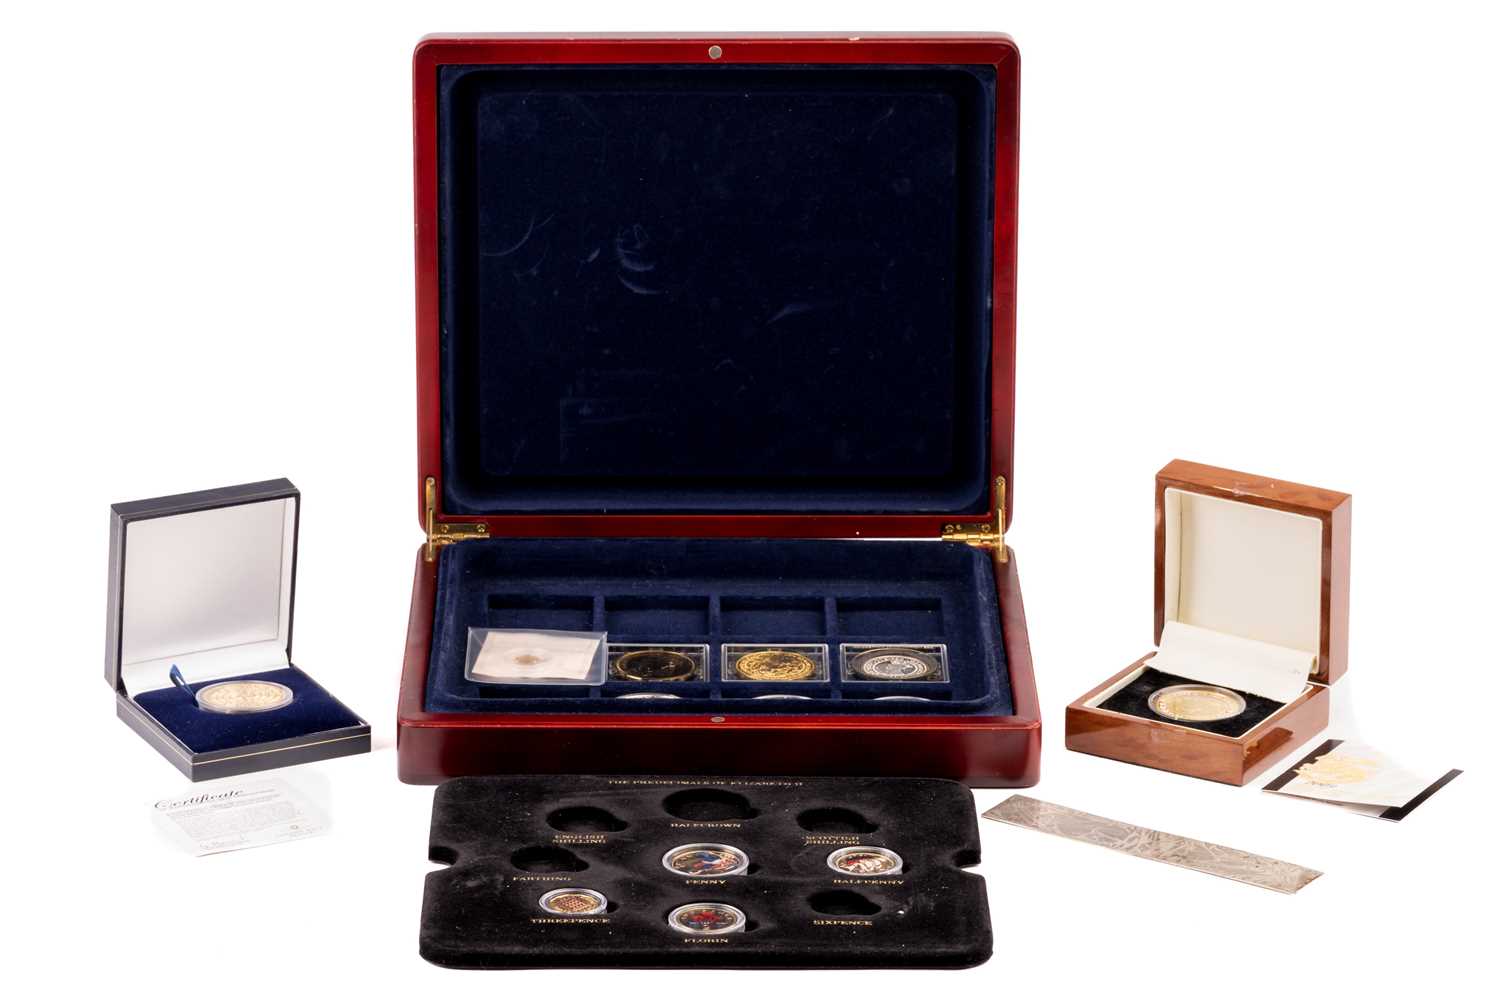 Two Tristan Da Cunha gold plated sterling silver £5 crowns, 2008 & 2009, a 585 ct gold proof